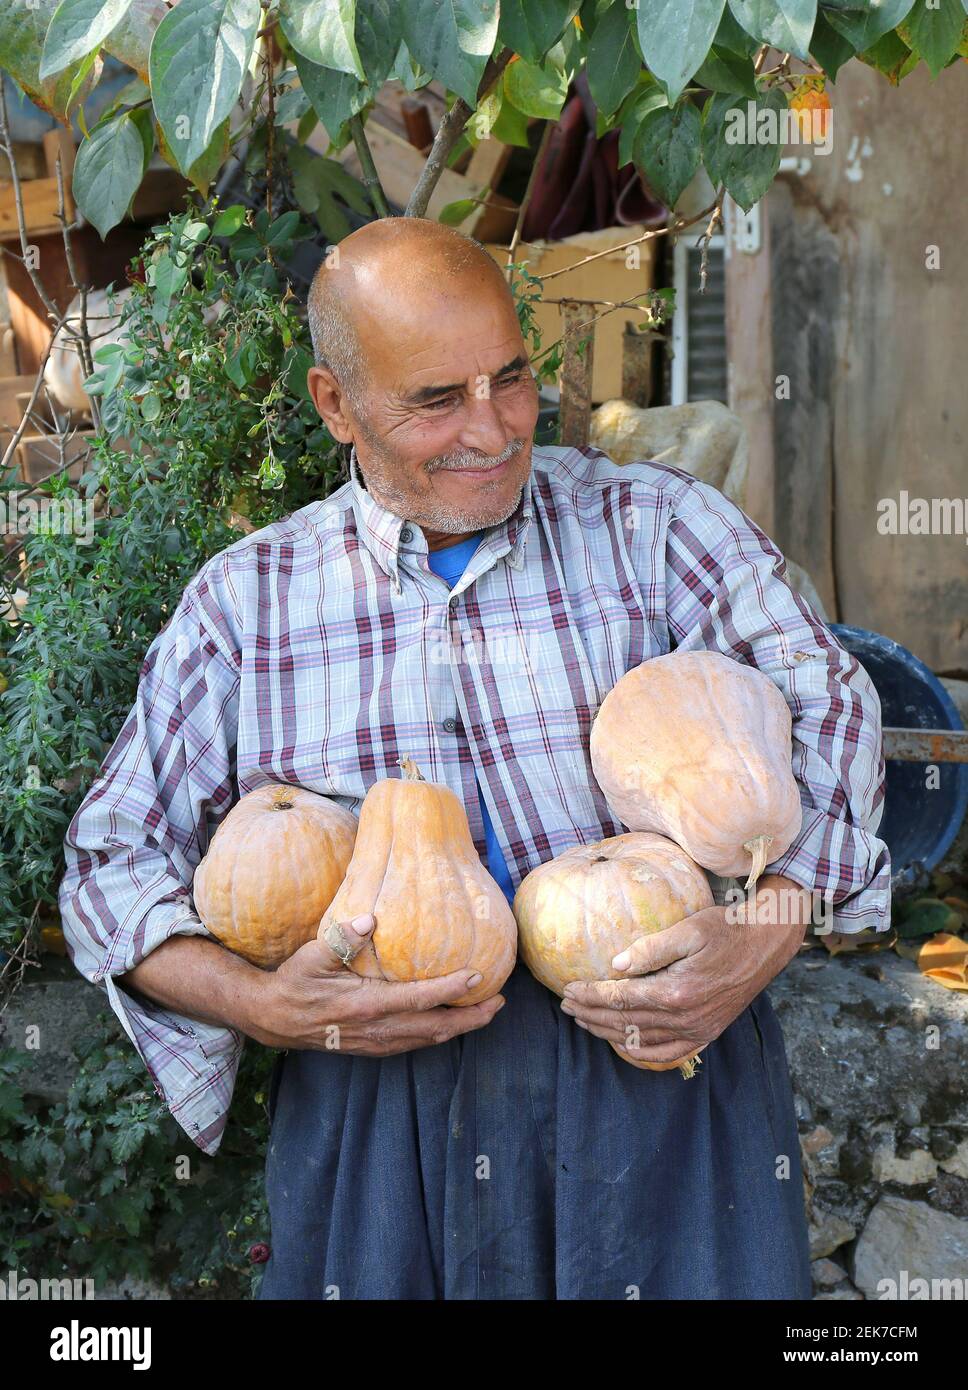 CAMLIYAYLA,ICEL,TURKEY-OCTOBER 30:Unidentified Old Shy Man showing his pumpkins to customers.October 30,2016. Stock Photo